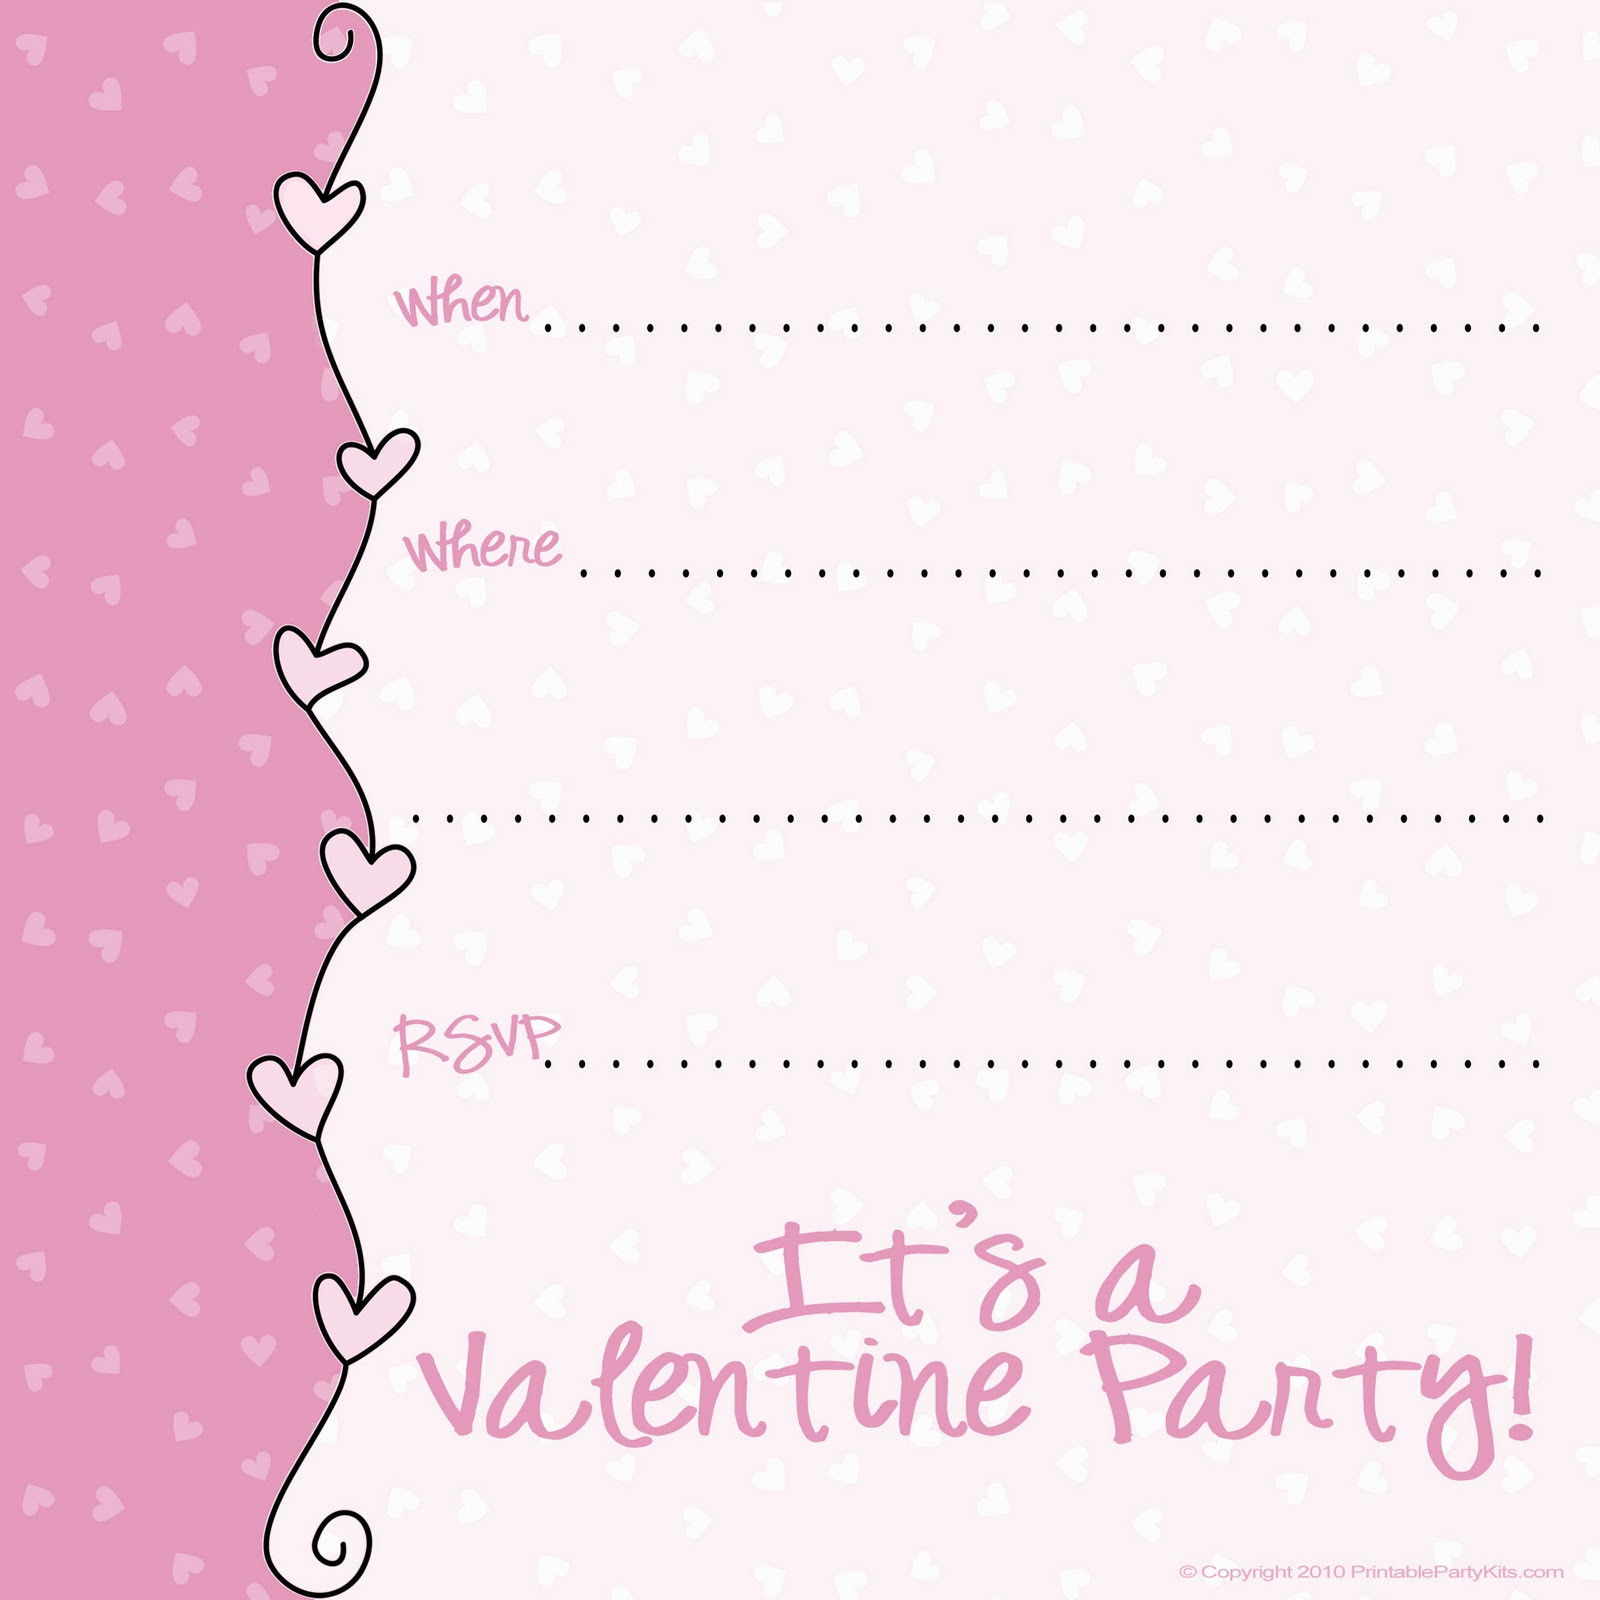 Valentines Day Party Invitations
 Free Printable Party Invitations Invitation Design for a